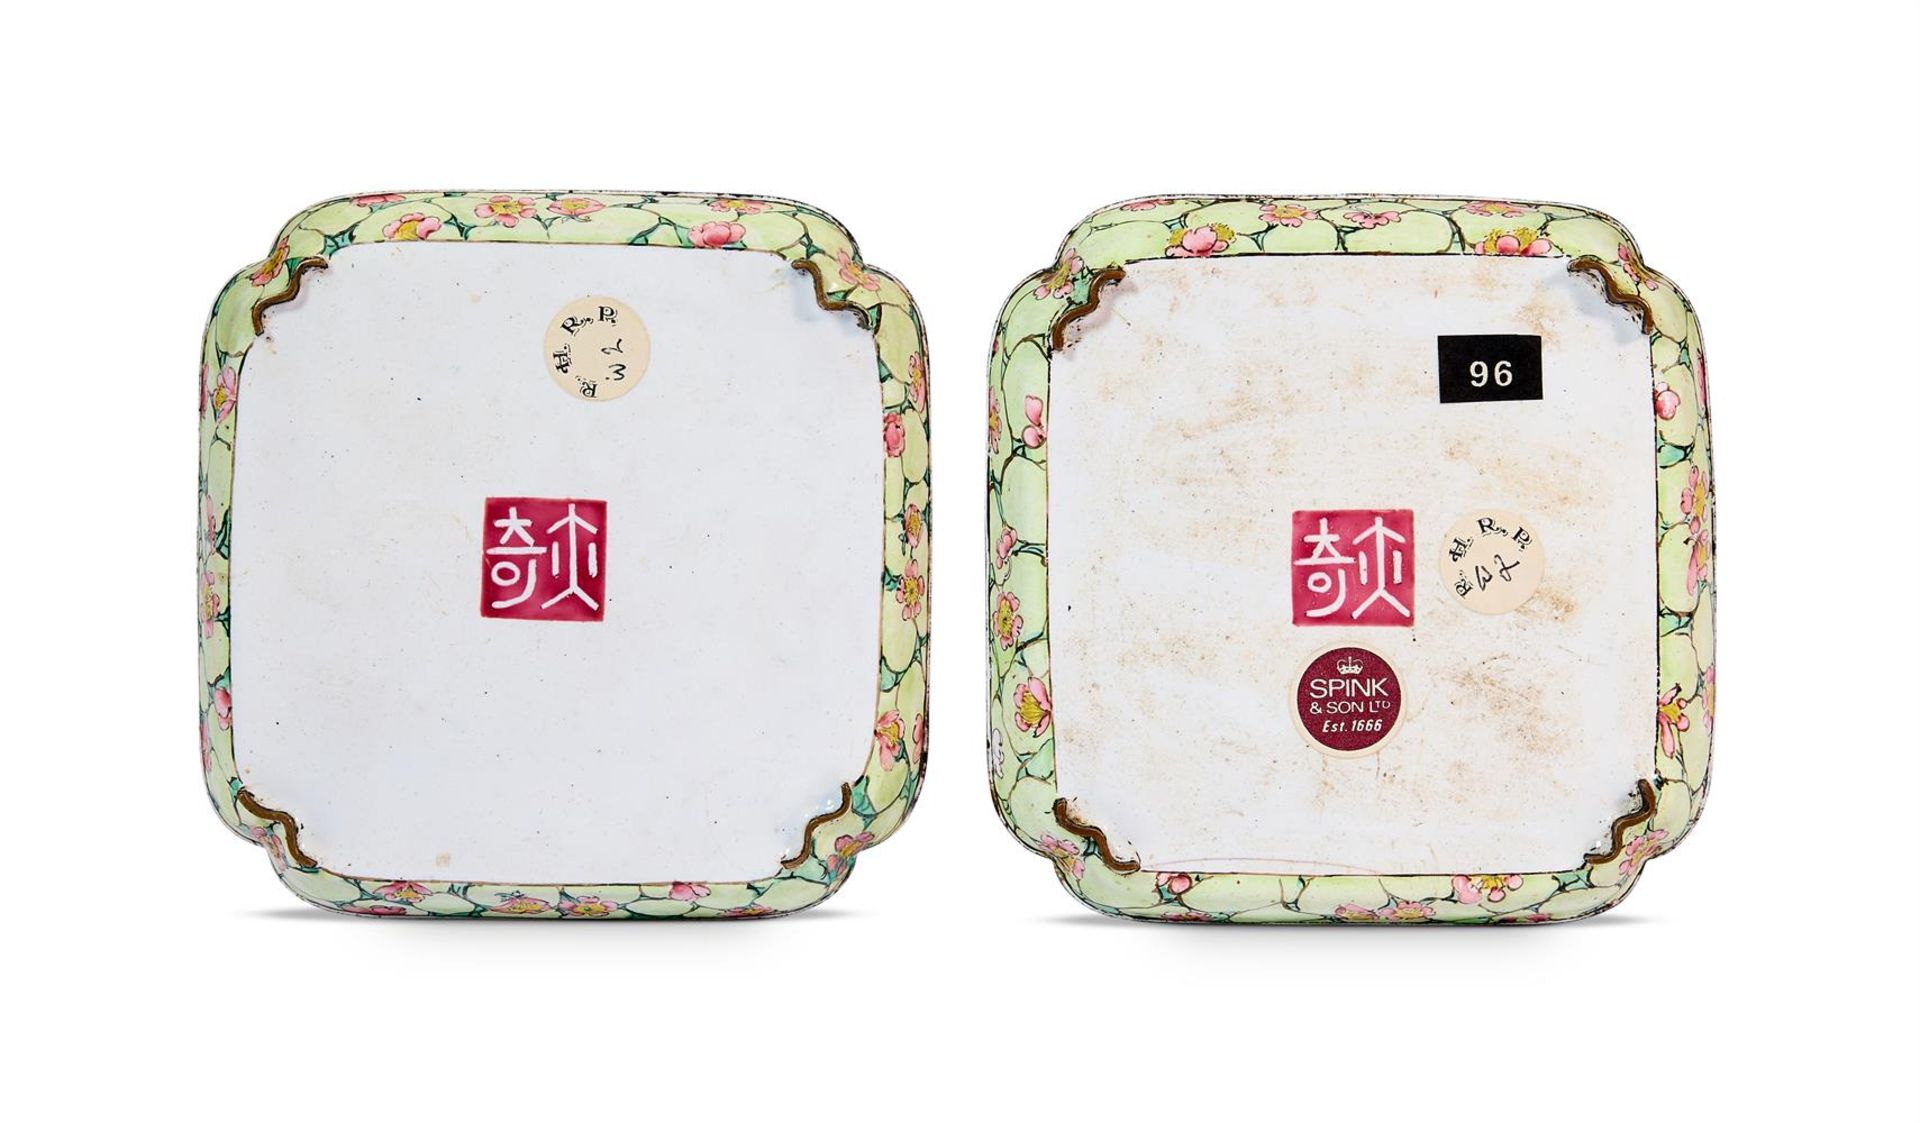 A PAIR OF CHINESE CANTON ENAMEL SQUARE DISHES, QING DYNASTY - Image 2 of 7